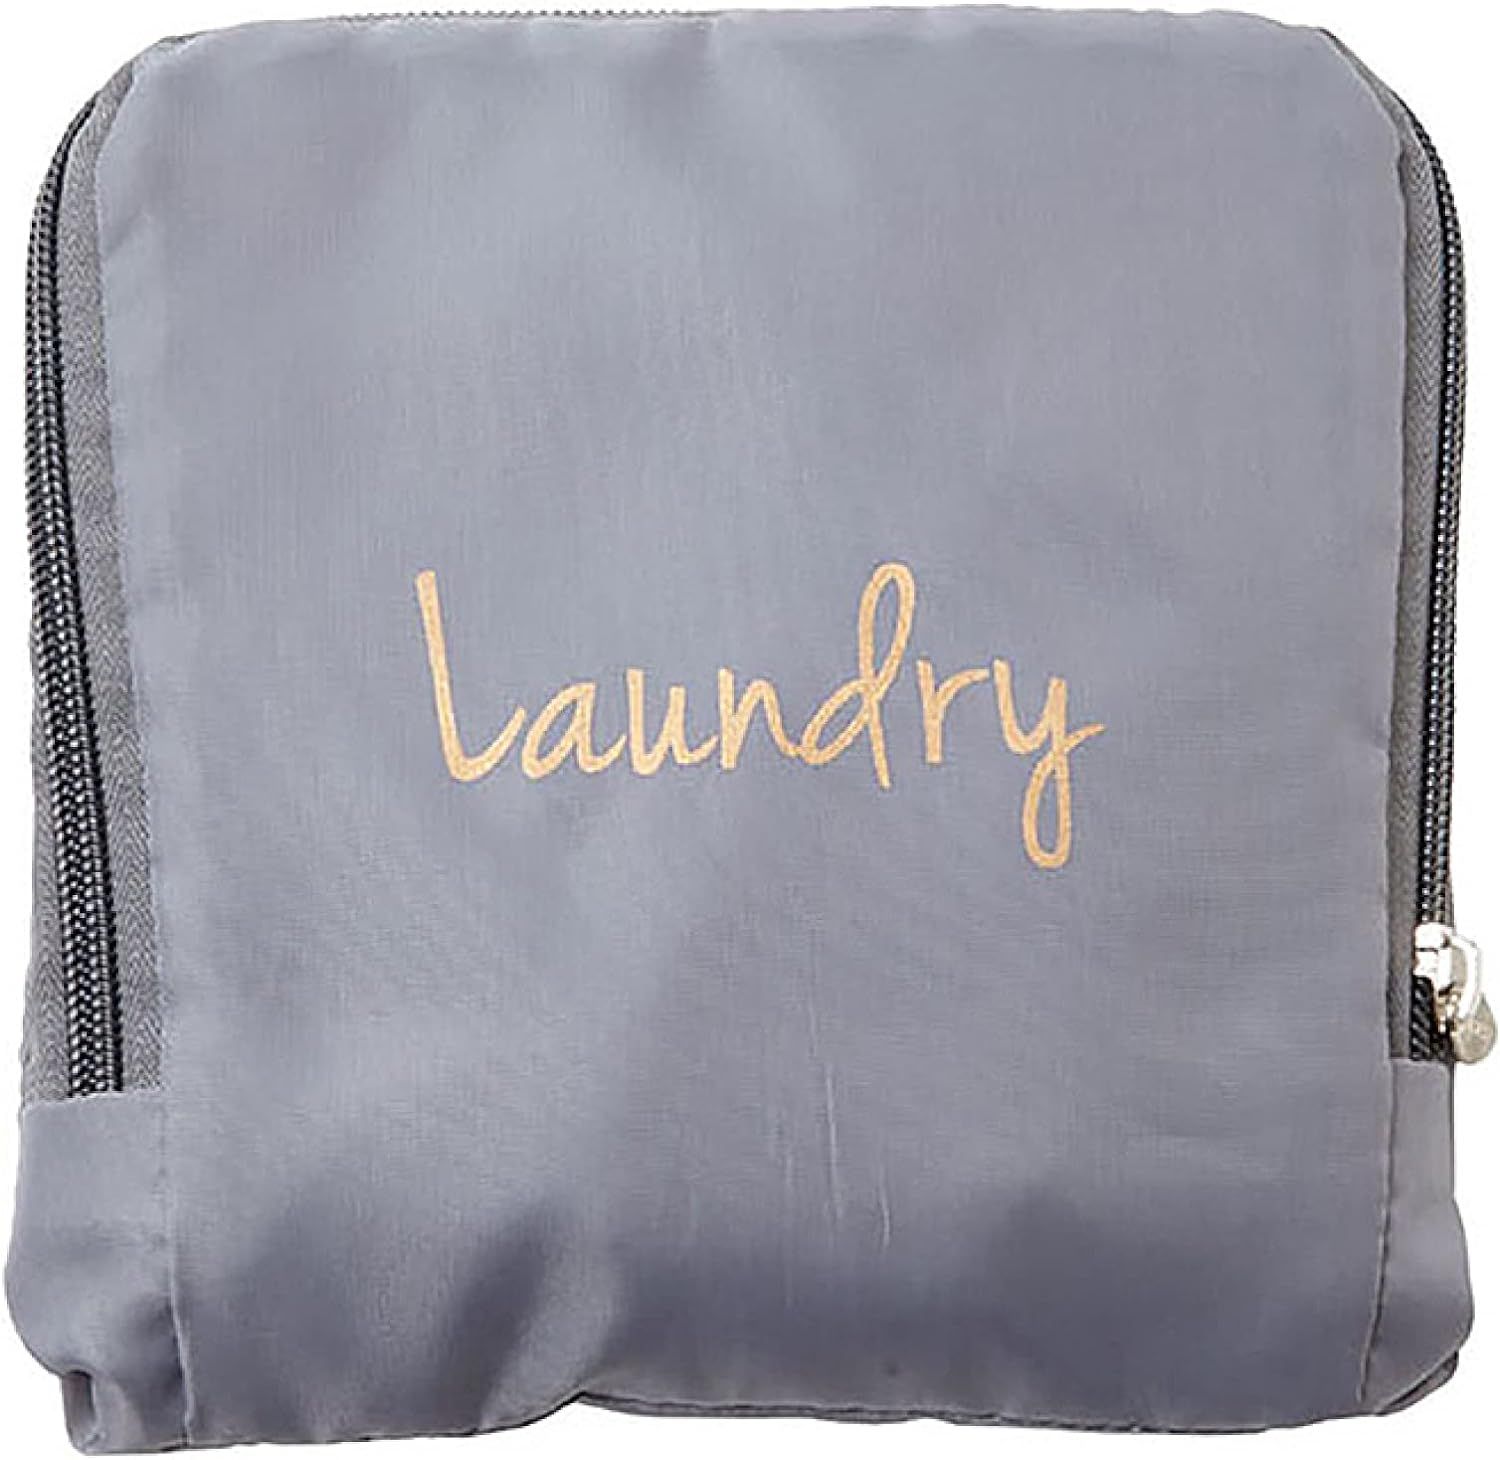 Miamica Laundry Bag, Assorted Styles, Grey/Gold, One Size | Amazon (US)